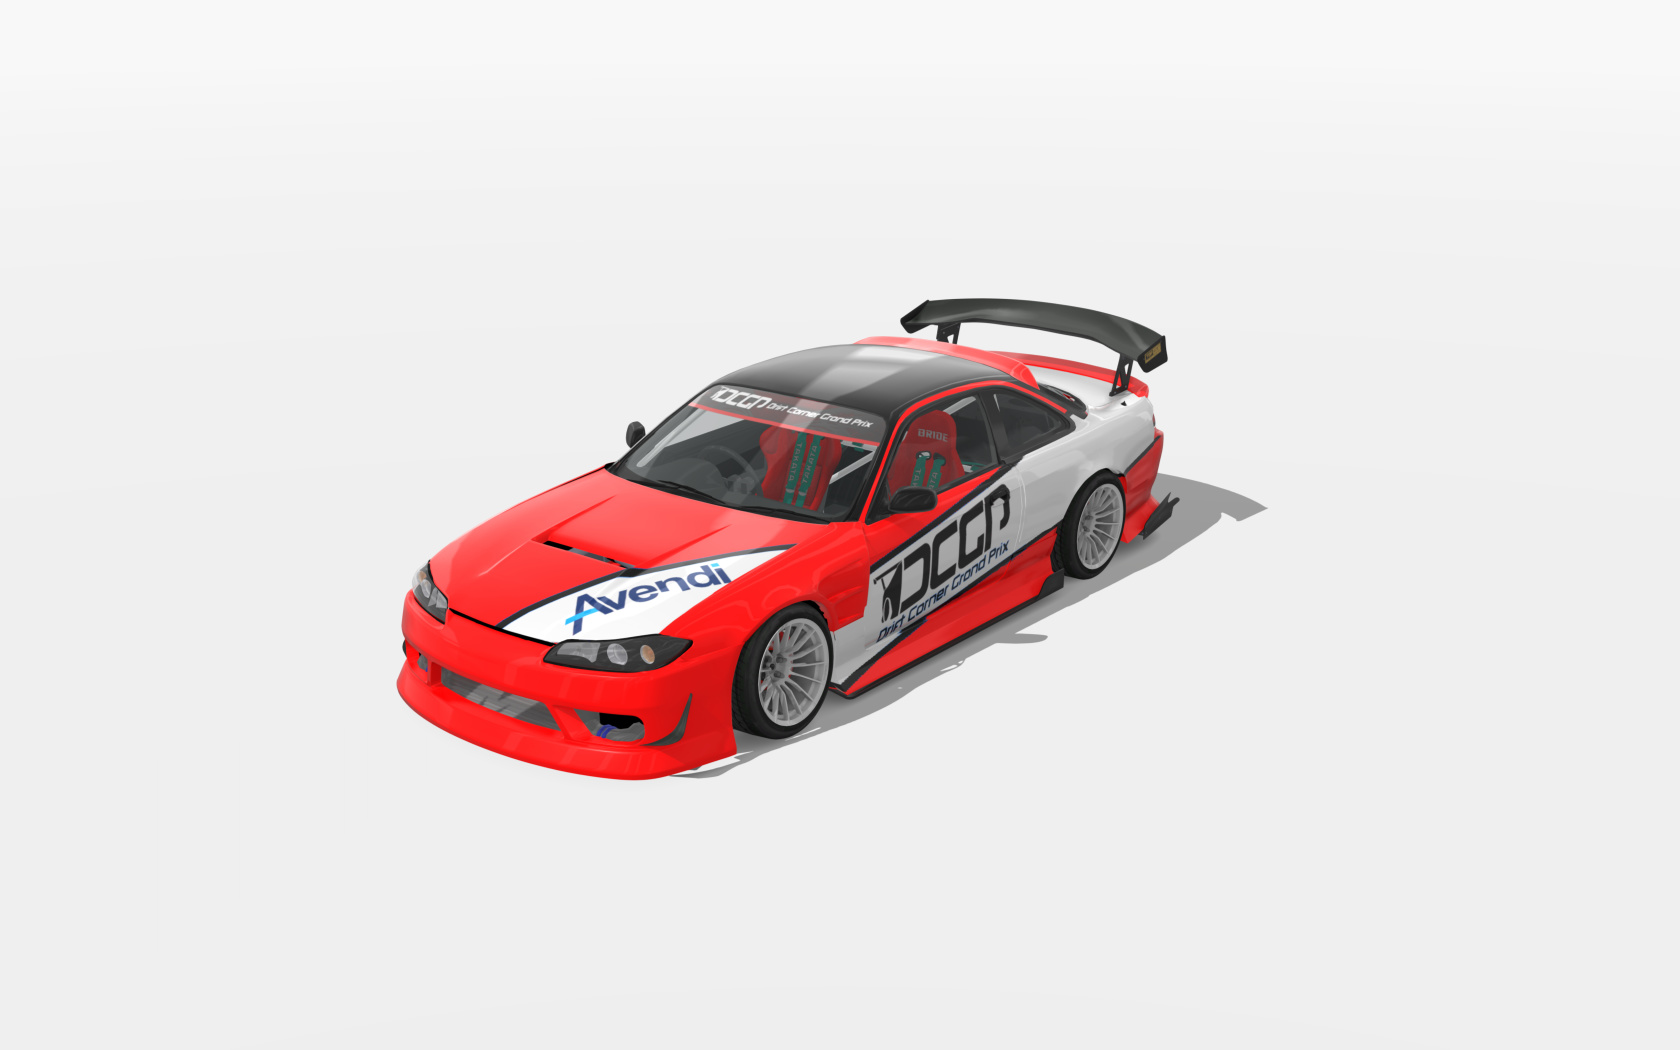 DCGP Nissan S14, skin red